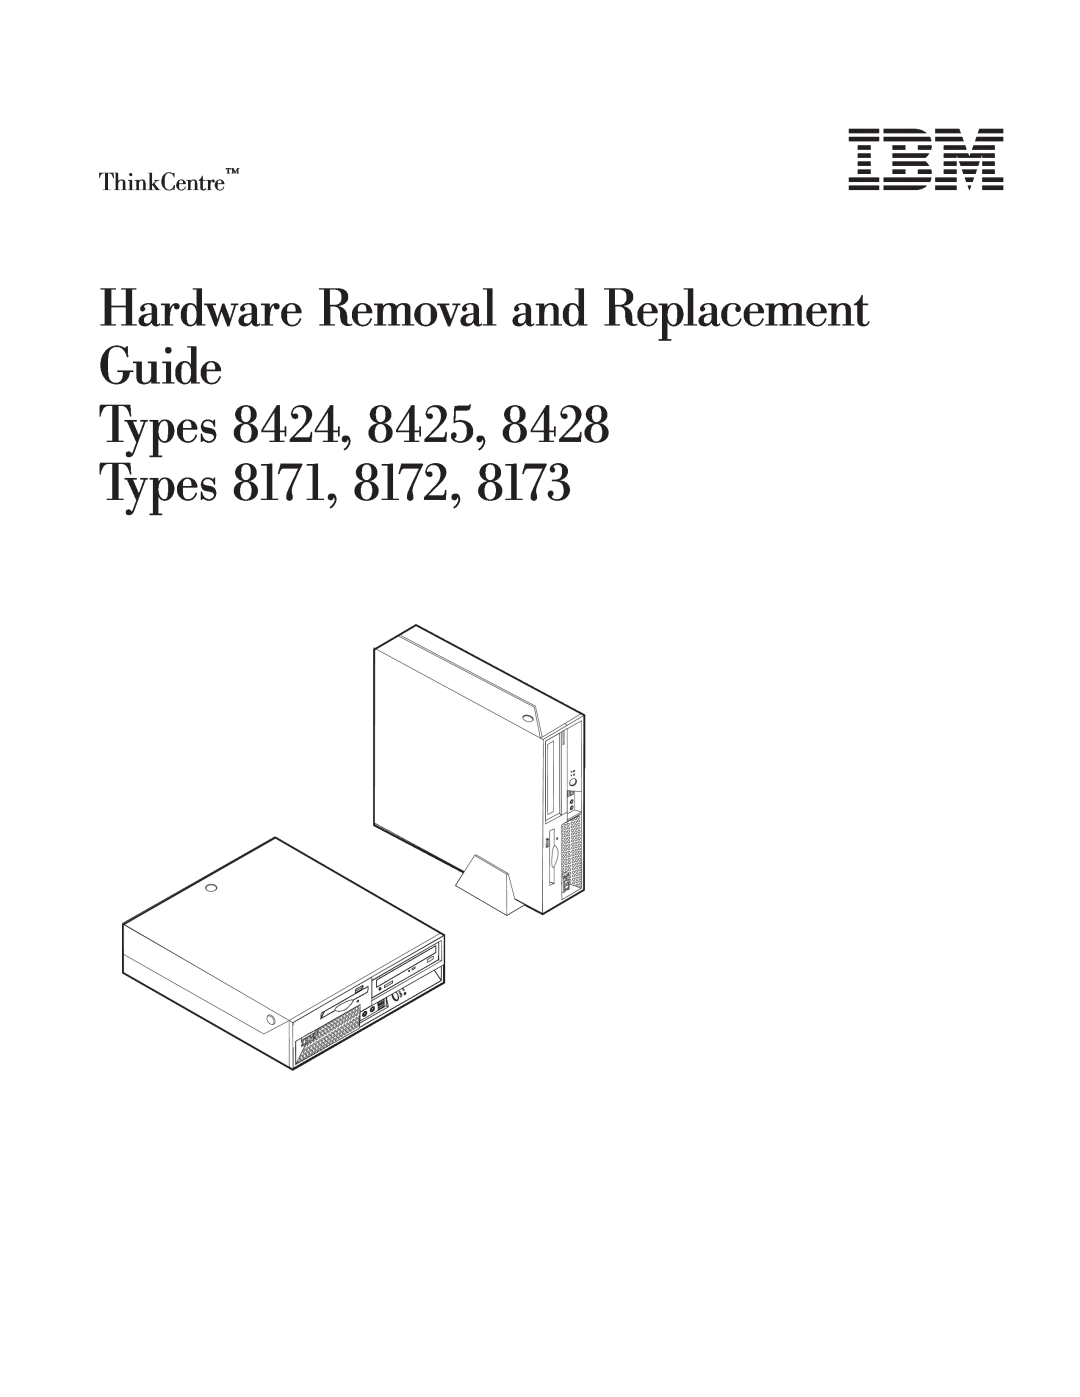 IBM 8428, 8173 manual Hardware Removal and Replacement Guide Types 8424, 8425, Types 8171, 8172, ThinkCentre 